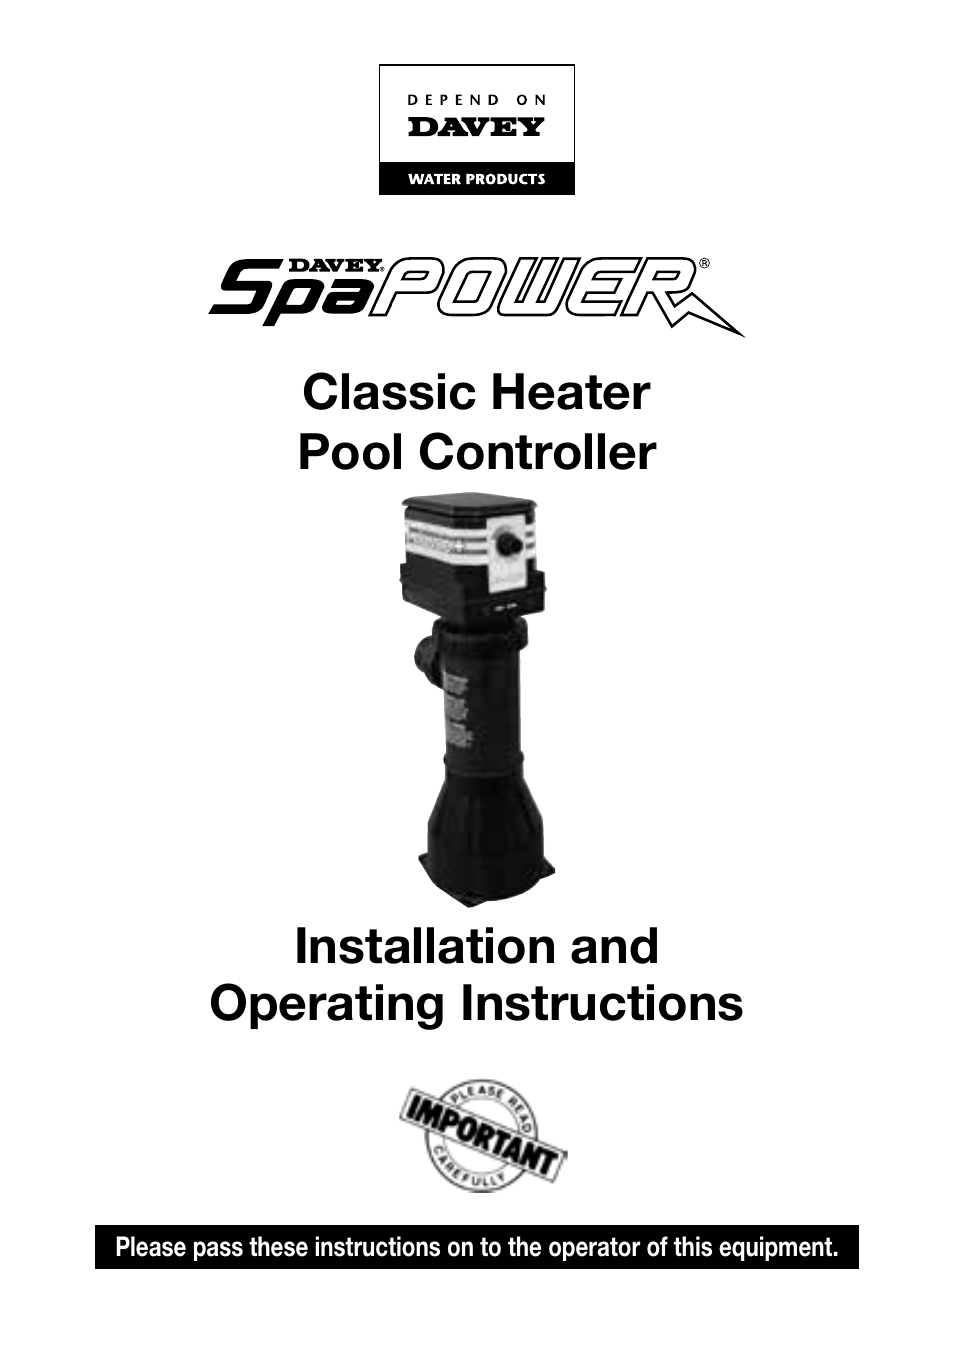 SPAPOWER CLASSIC HEATER